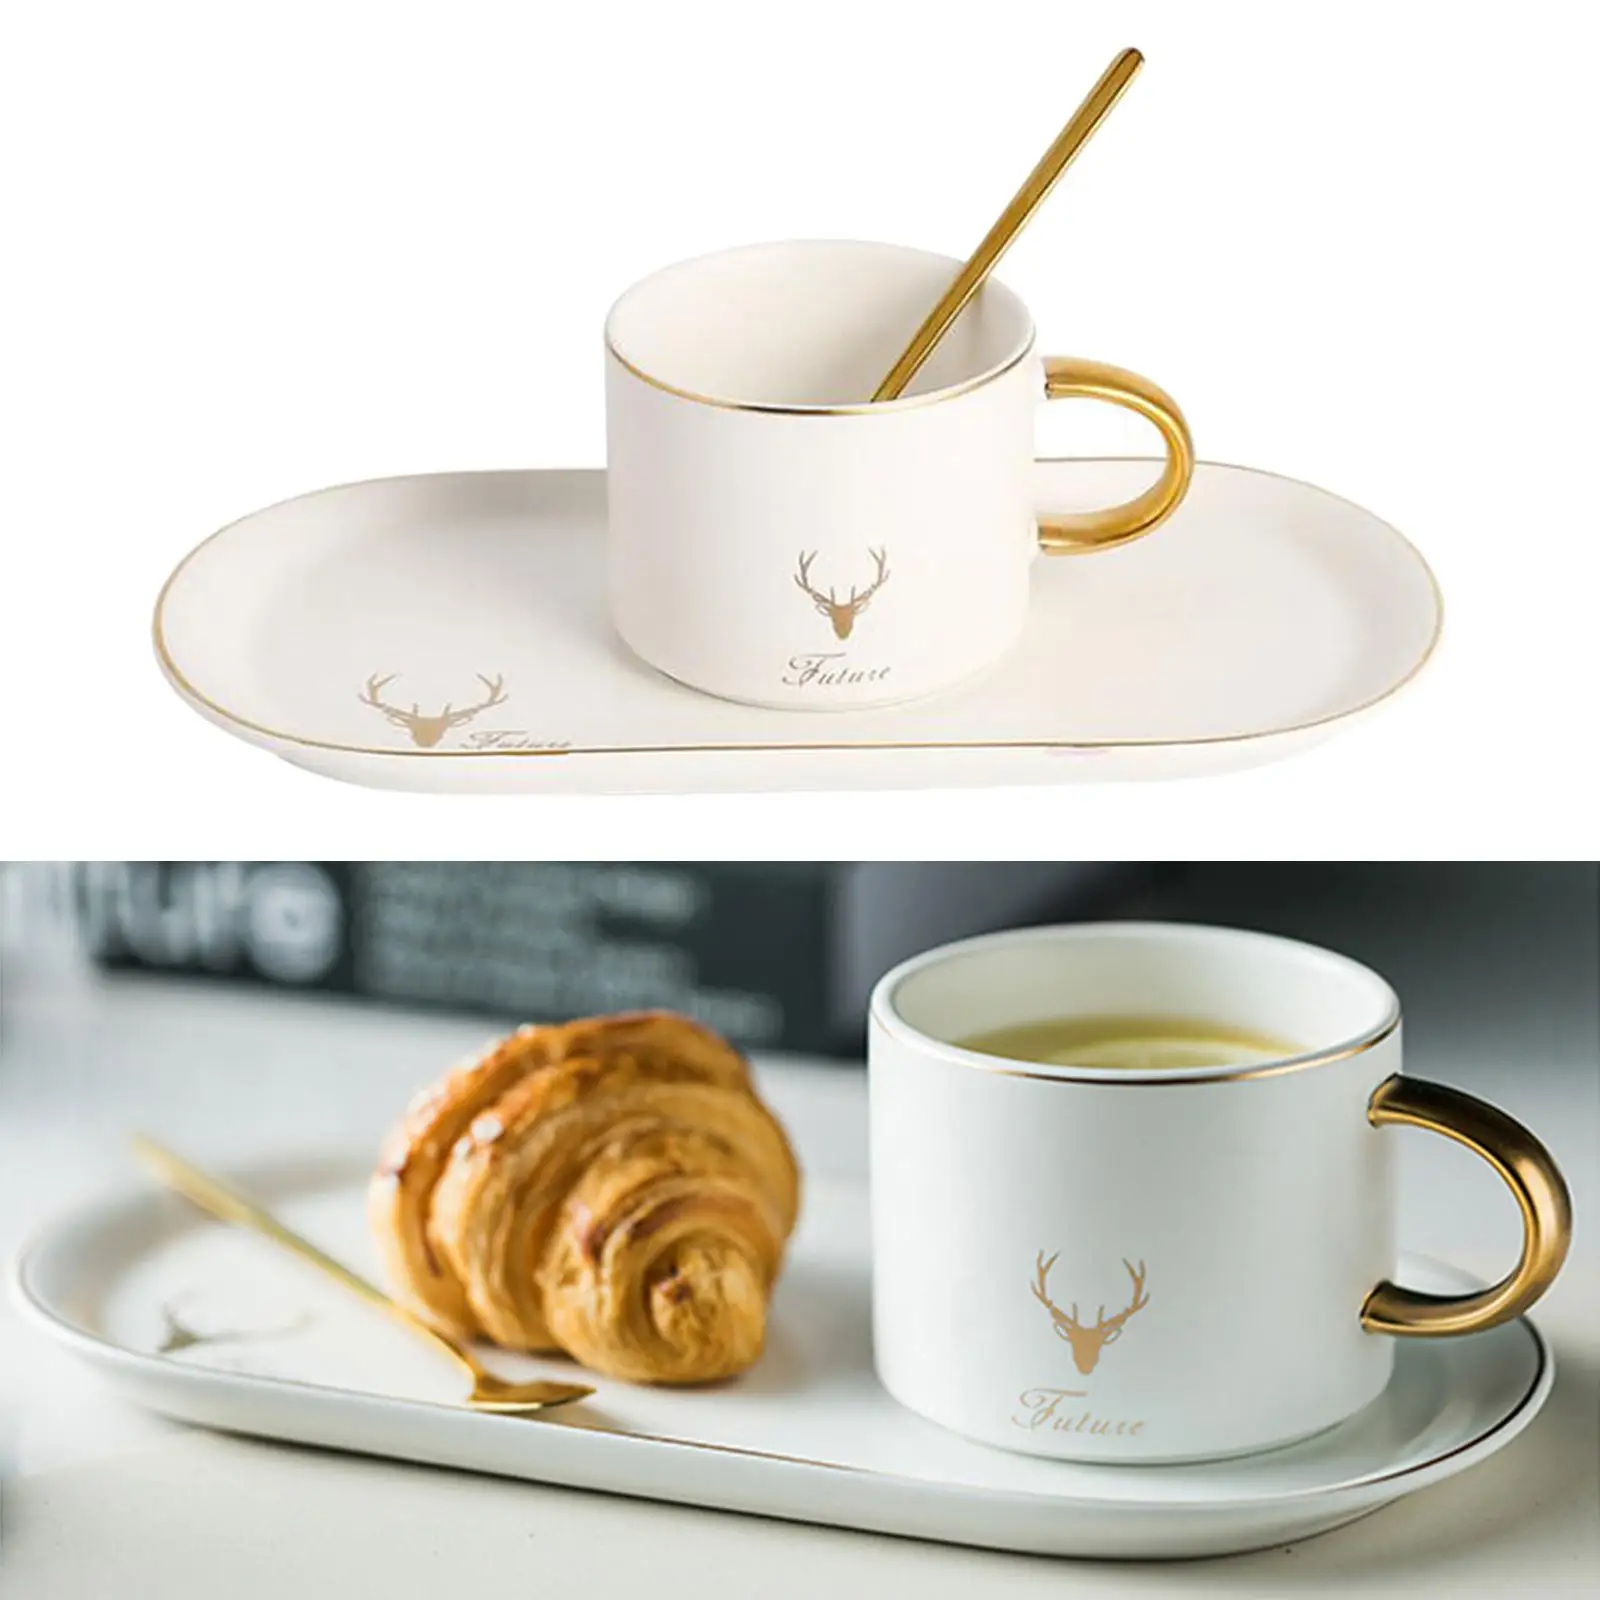 Ceramic Tableware Breakfast Coffee Cup Set inlcuding Saucer Tray and Spoon, Nordic Style